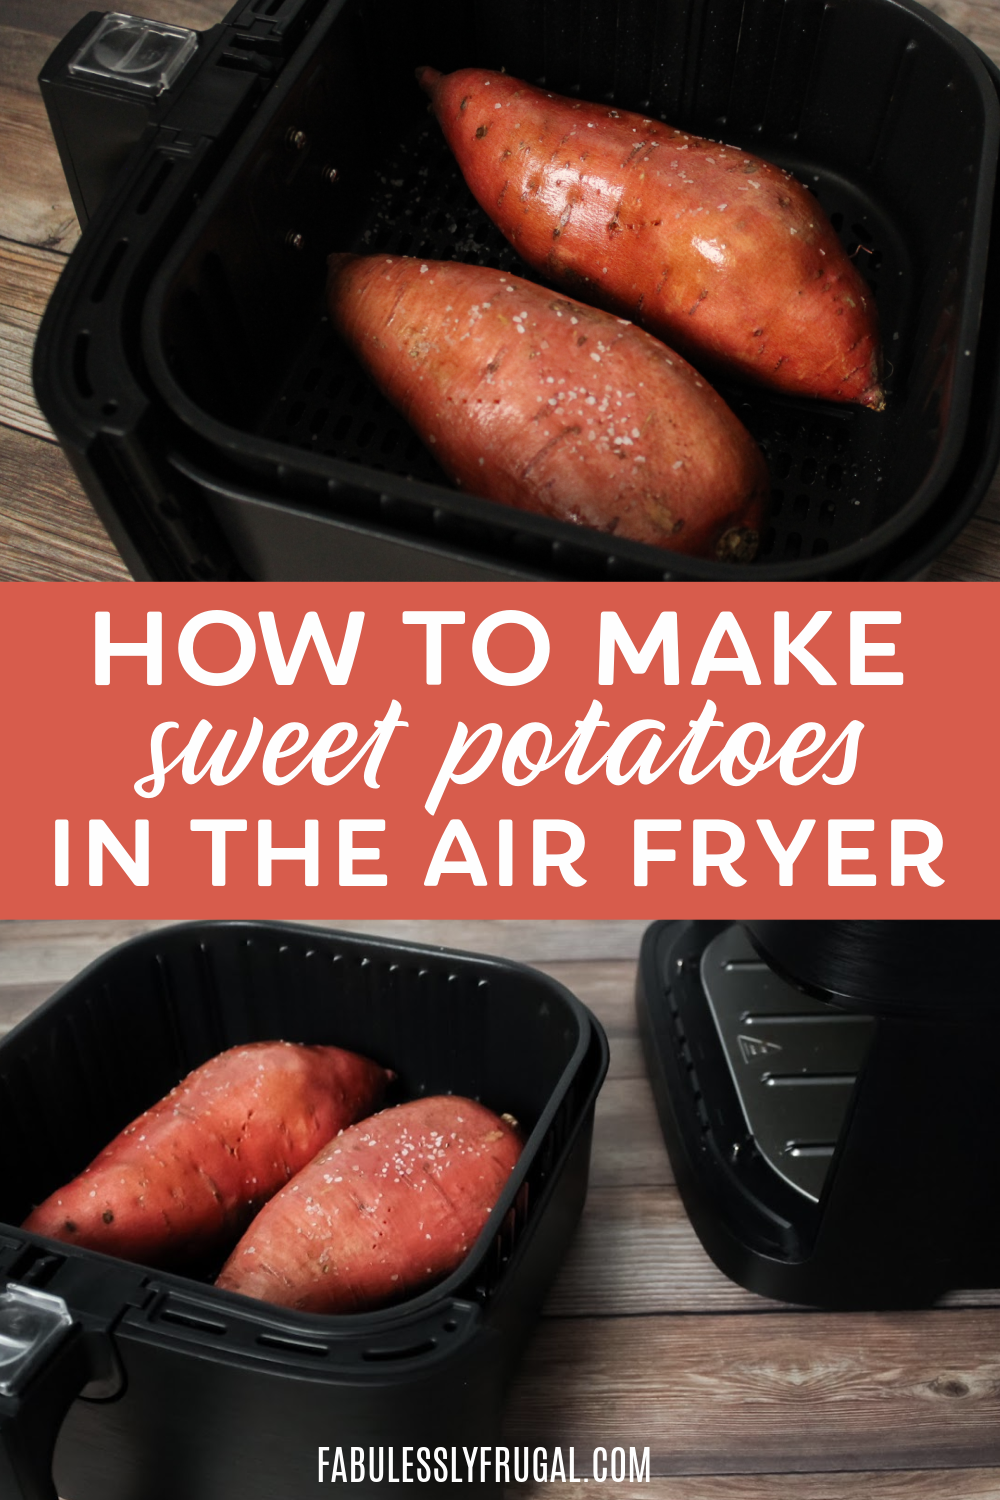 Air fryer sweet potatoes are easy, and tasty. You will love these air fryer sweet potatoes in minutes!